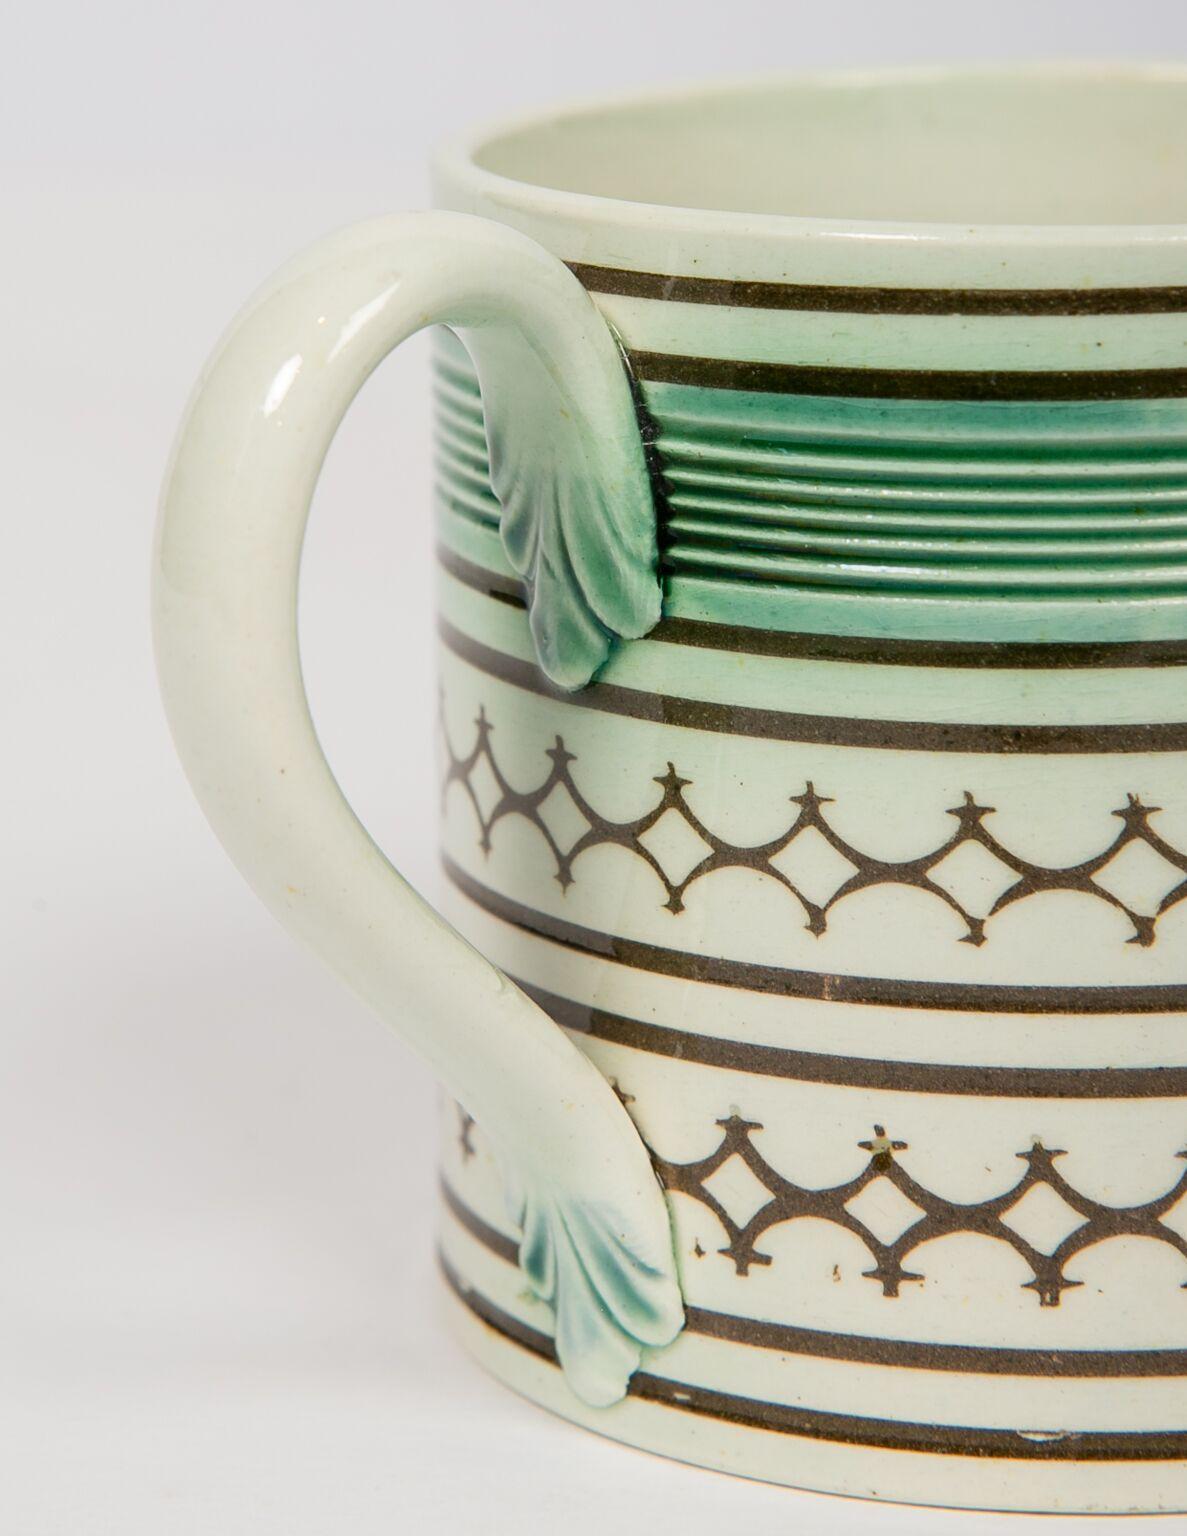 Small Mochaware mug England, circa 1820
Decorated with rouletted and green glaze decoration above two rows of inlaid rouletting black diamonds.
Dimensions: Diameter 2.5